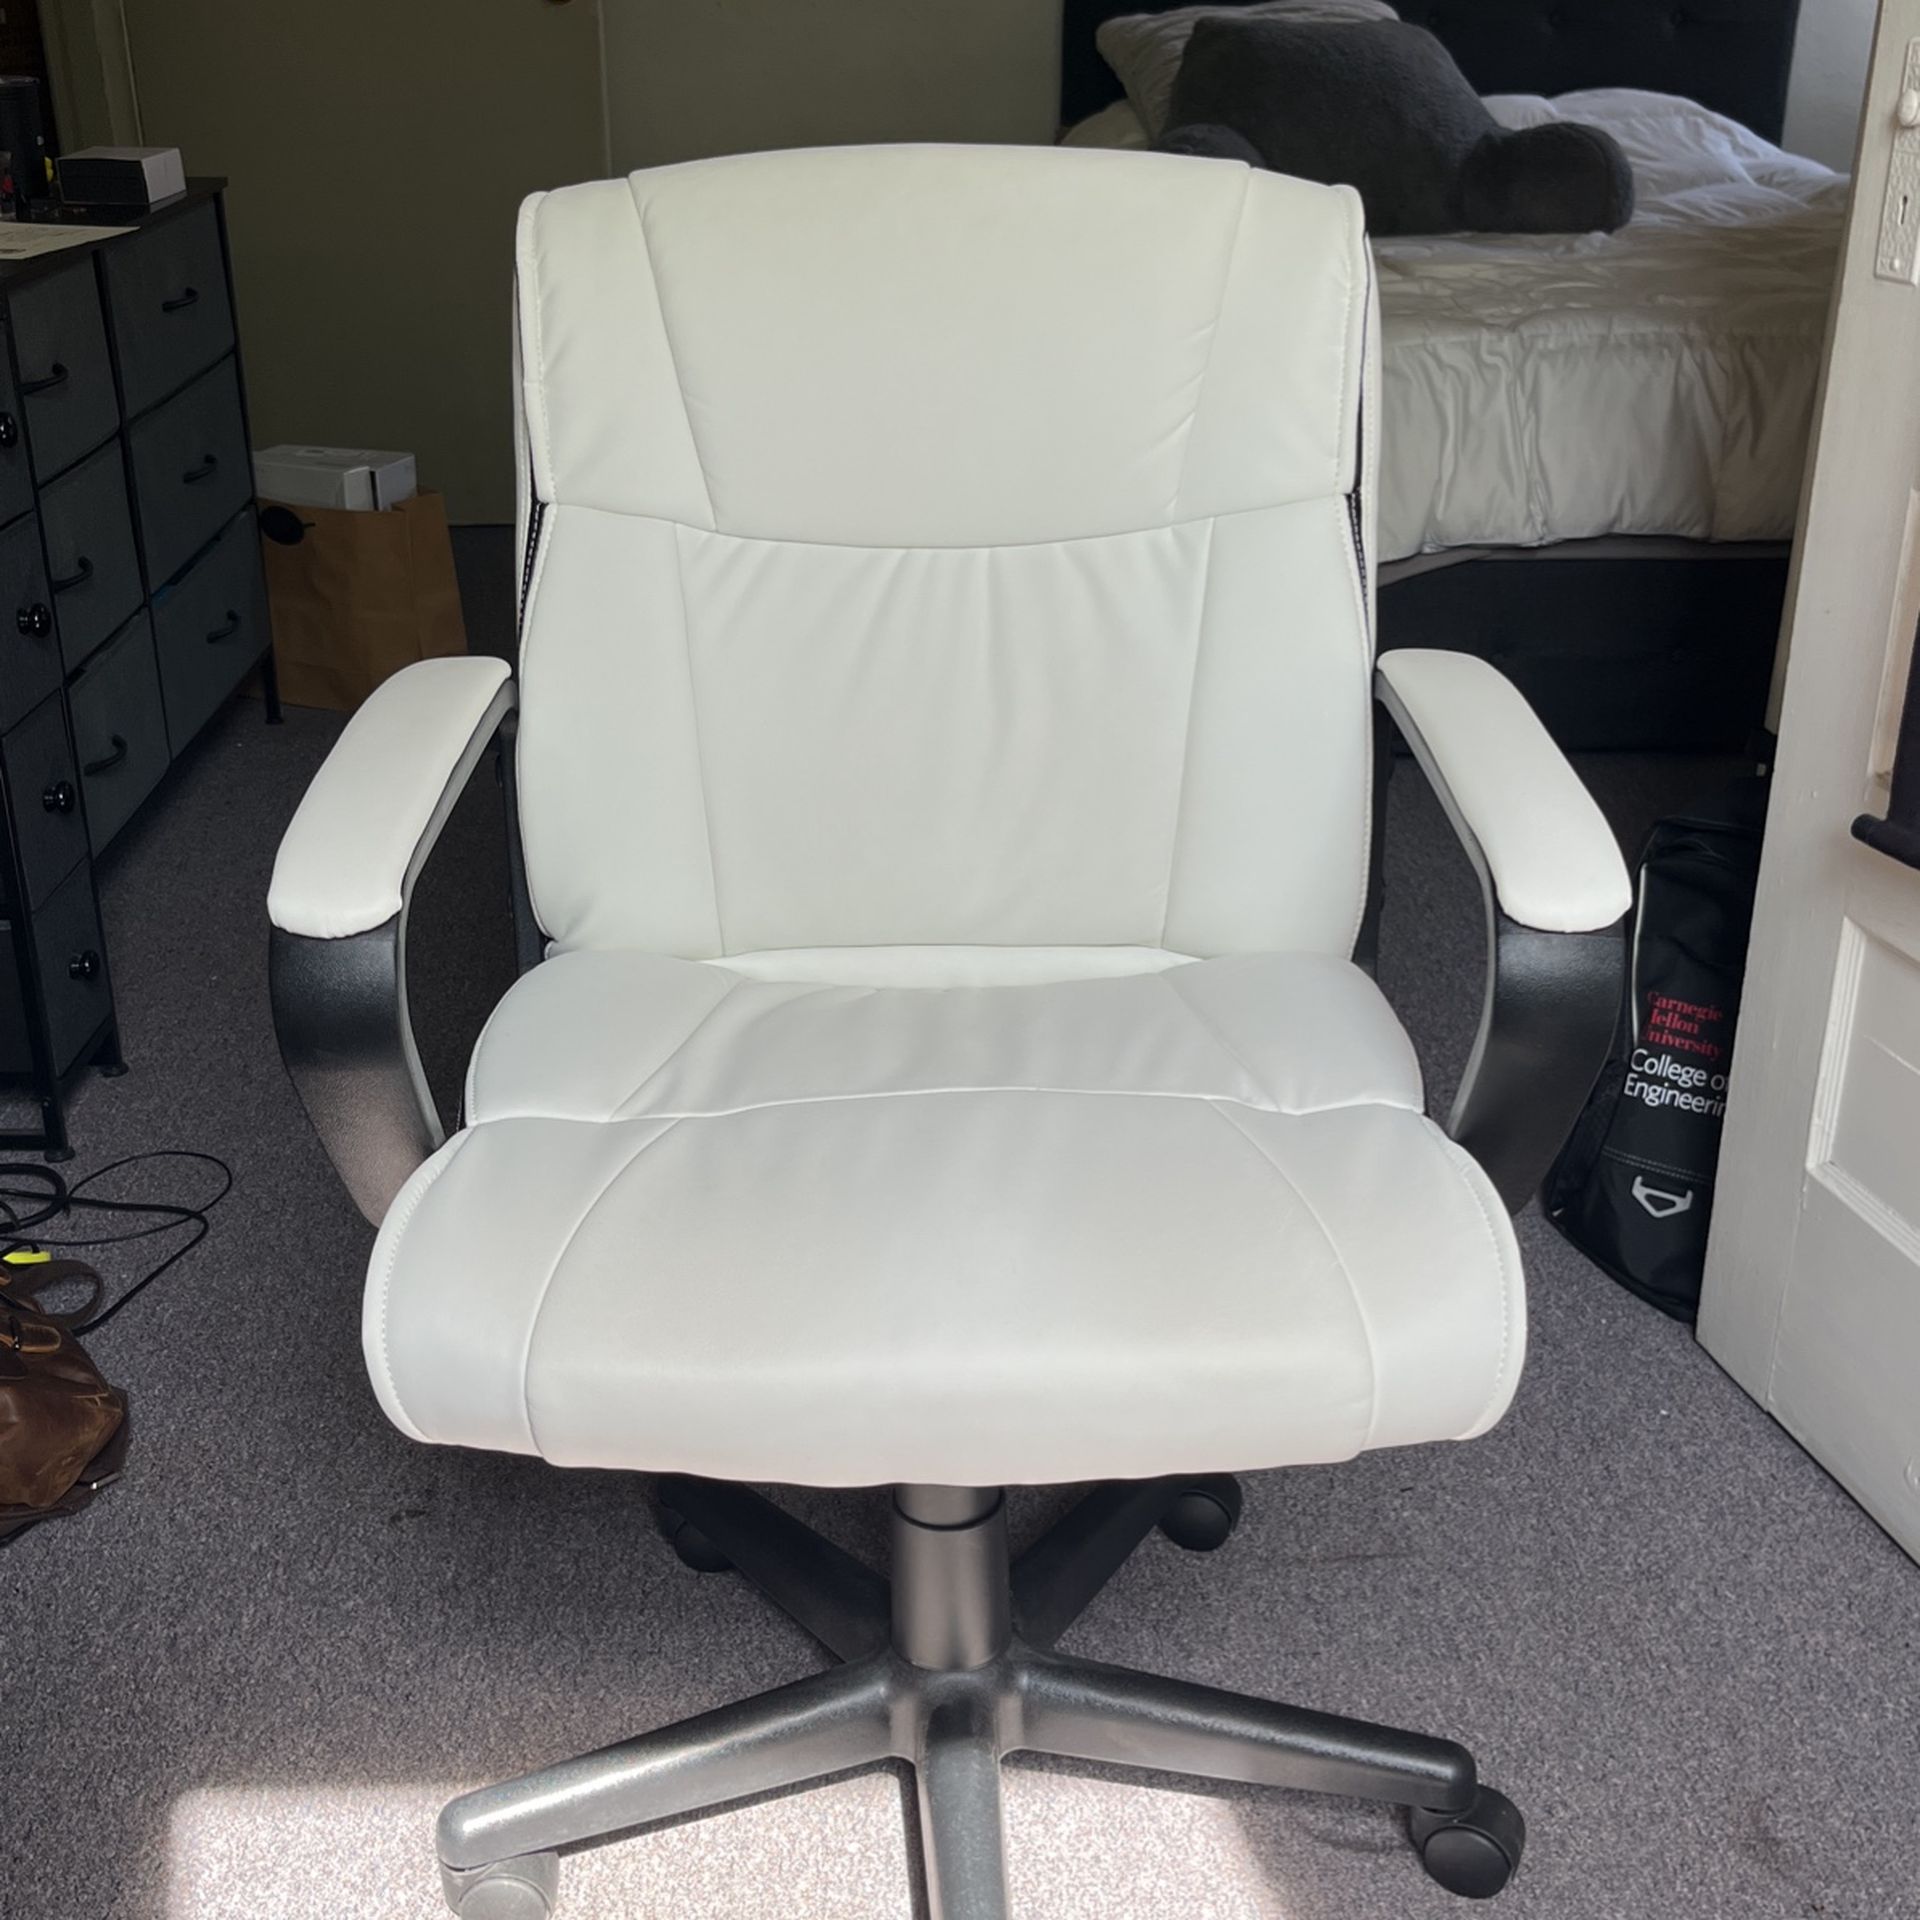 White Adjustable Chair